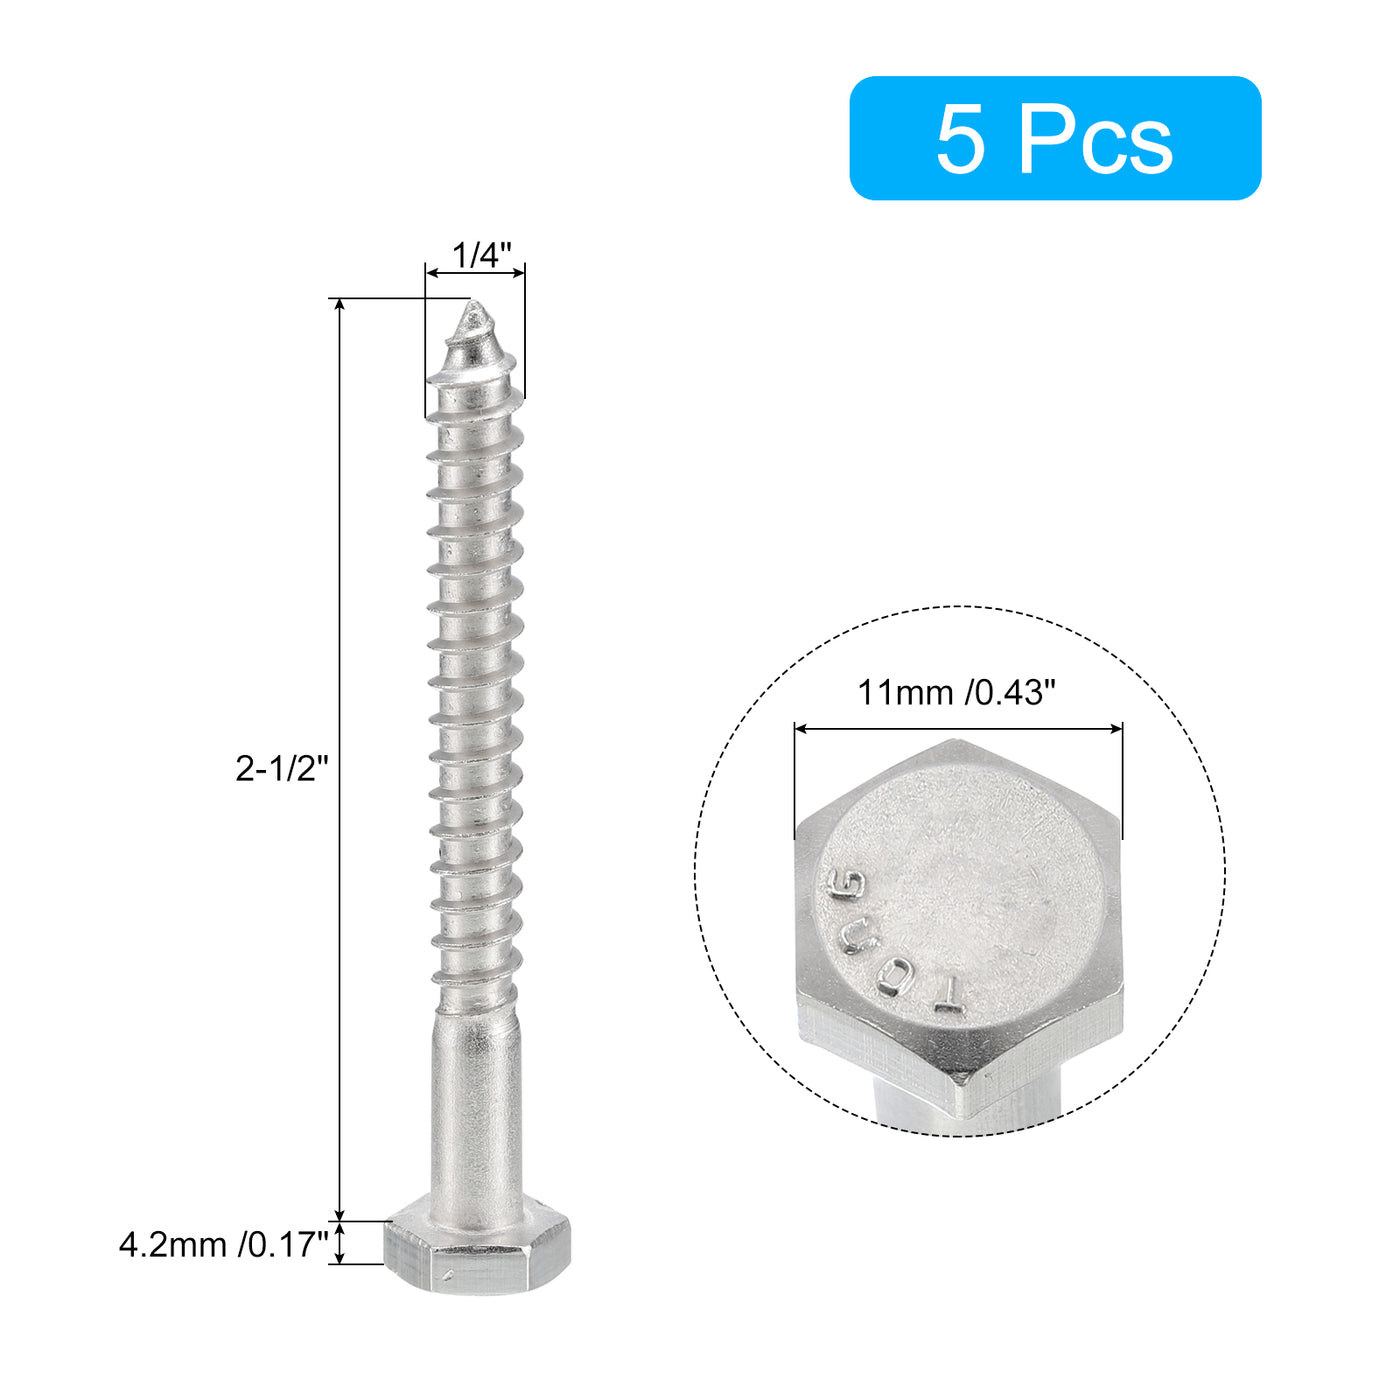 uxcell Uxcell Hex Head Lag Screws Bolts, 5pcs 1/4" x 2-1/2" 304 Stainless Steel Wood Screws